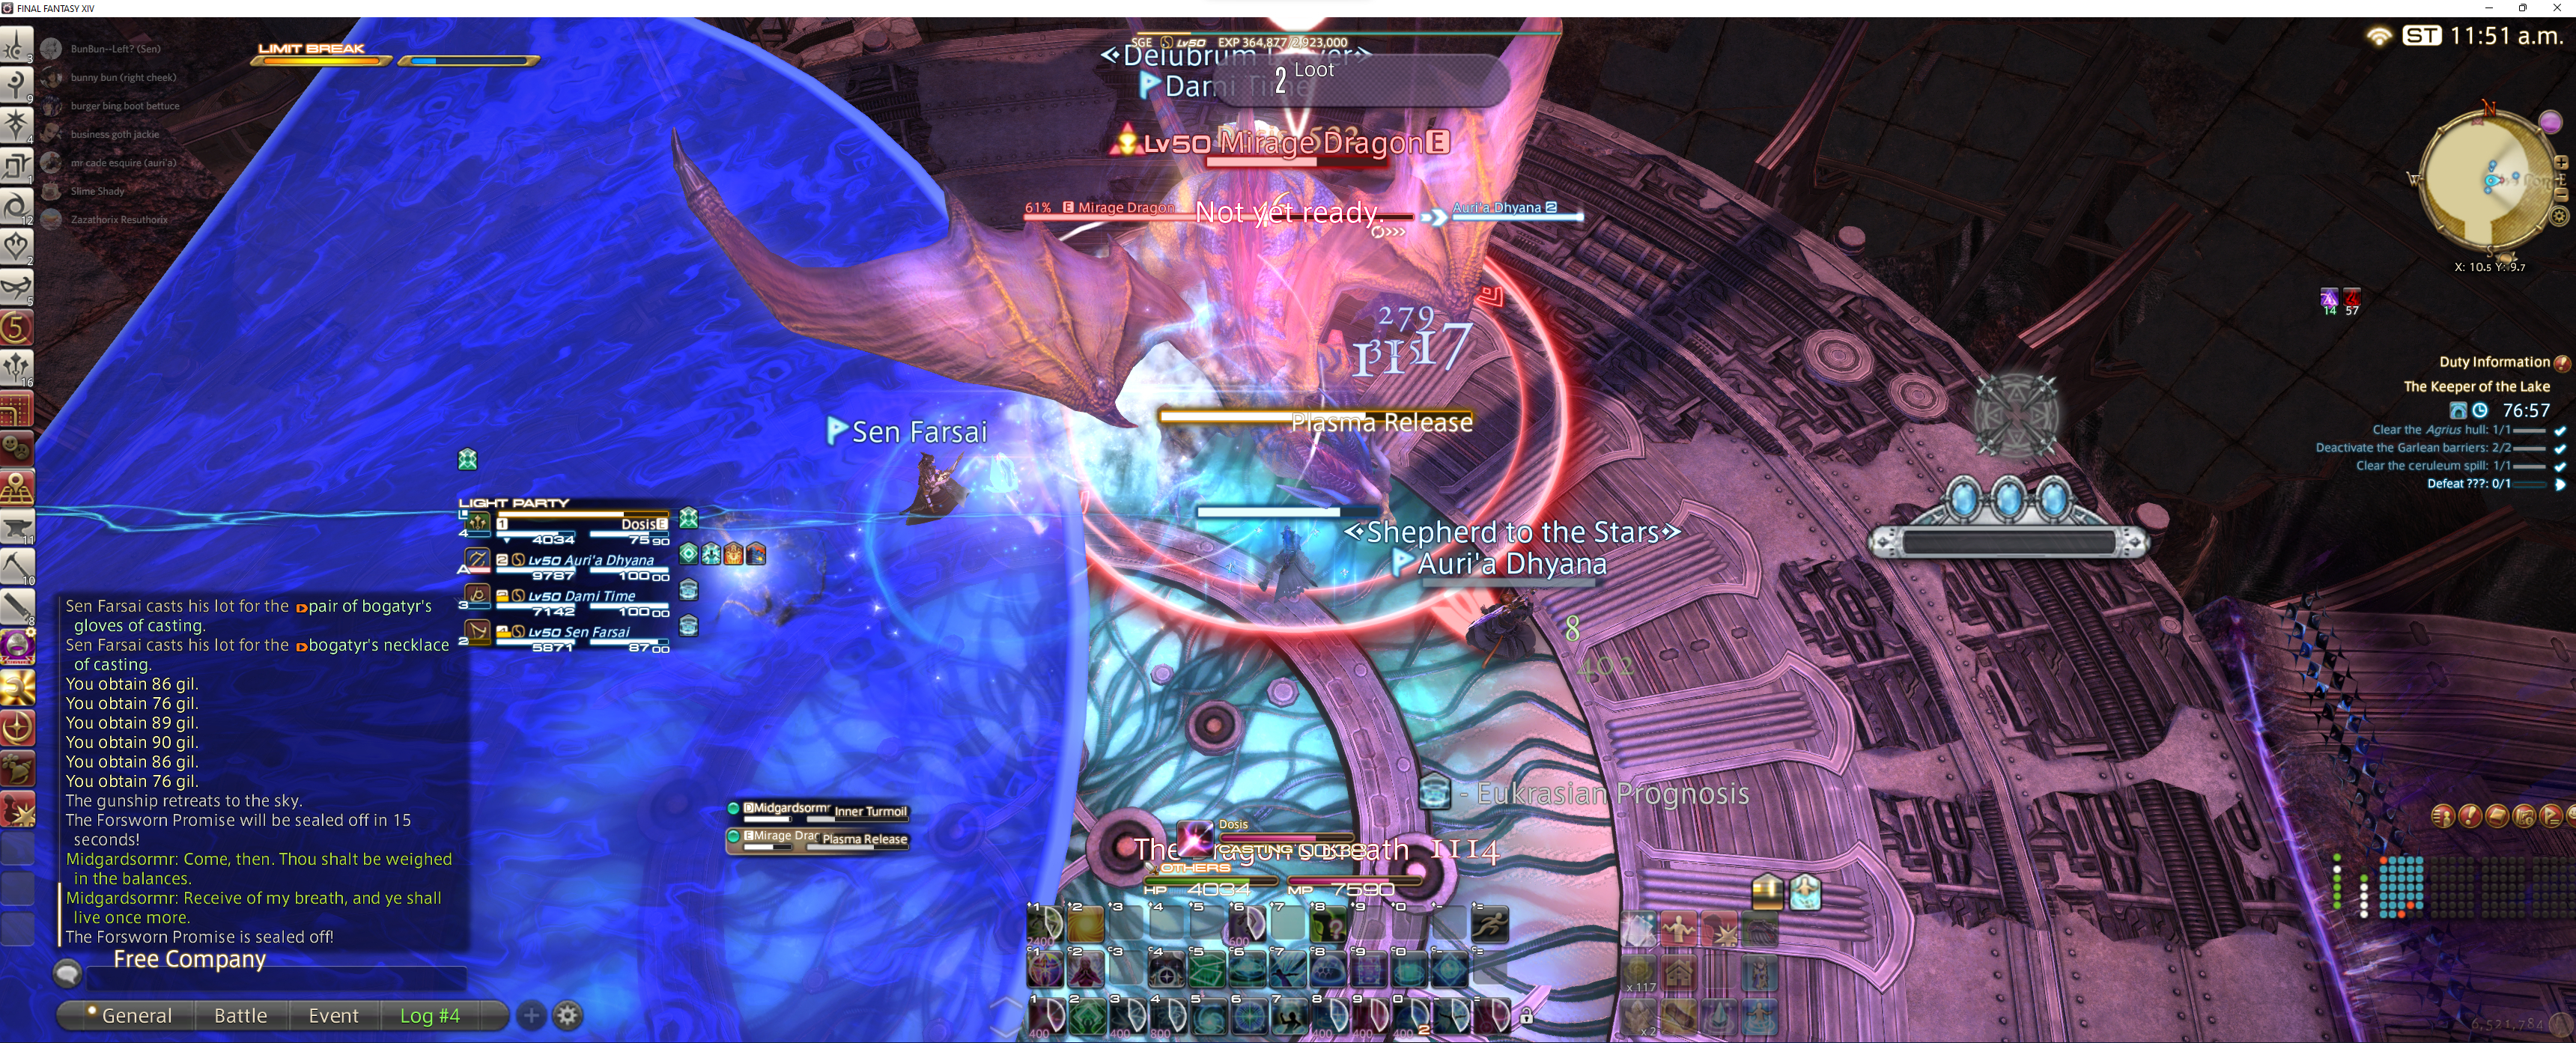 FFXIV, dungeon screenshot, from a Sage's point of view.